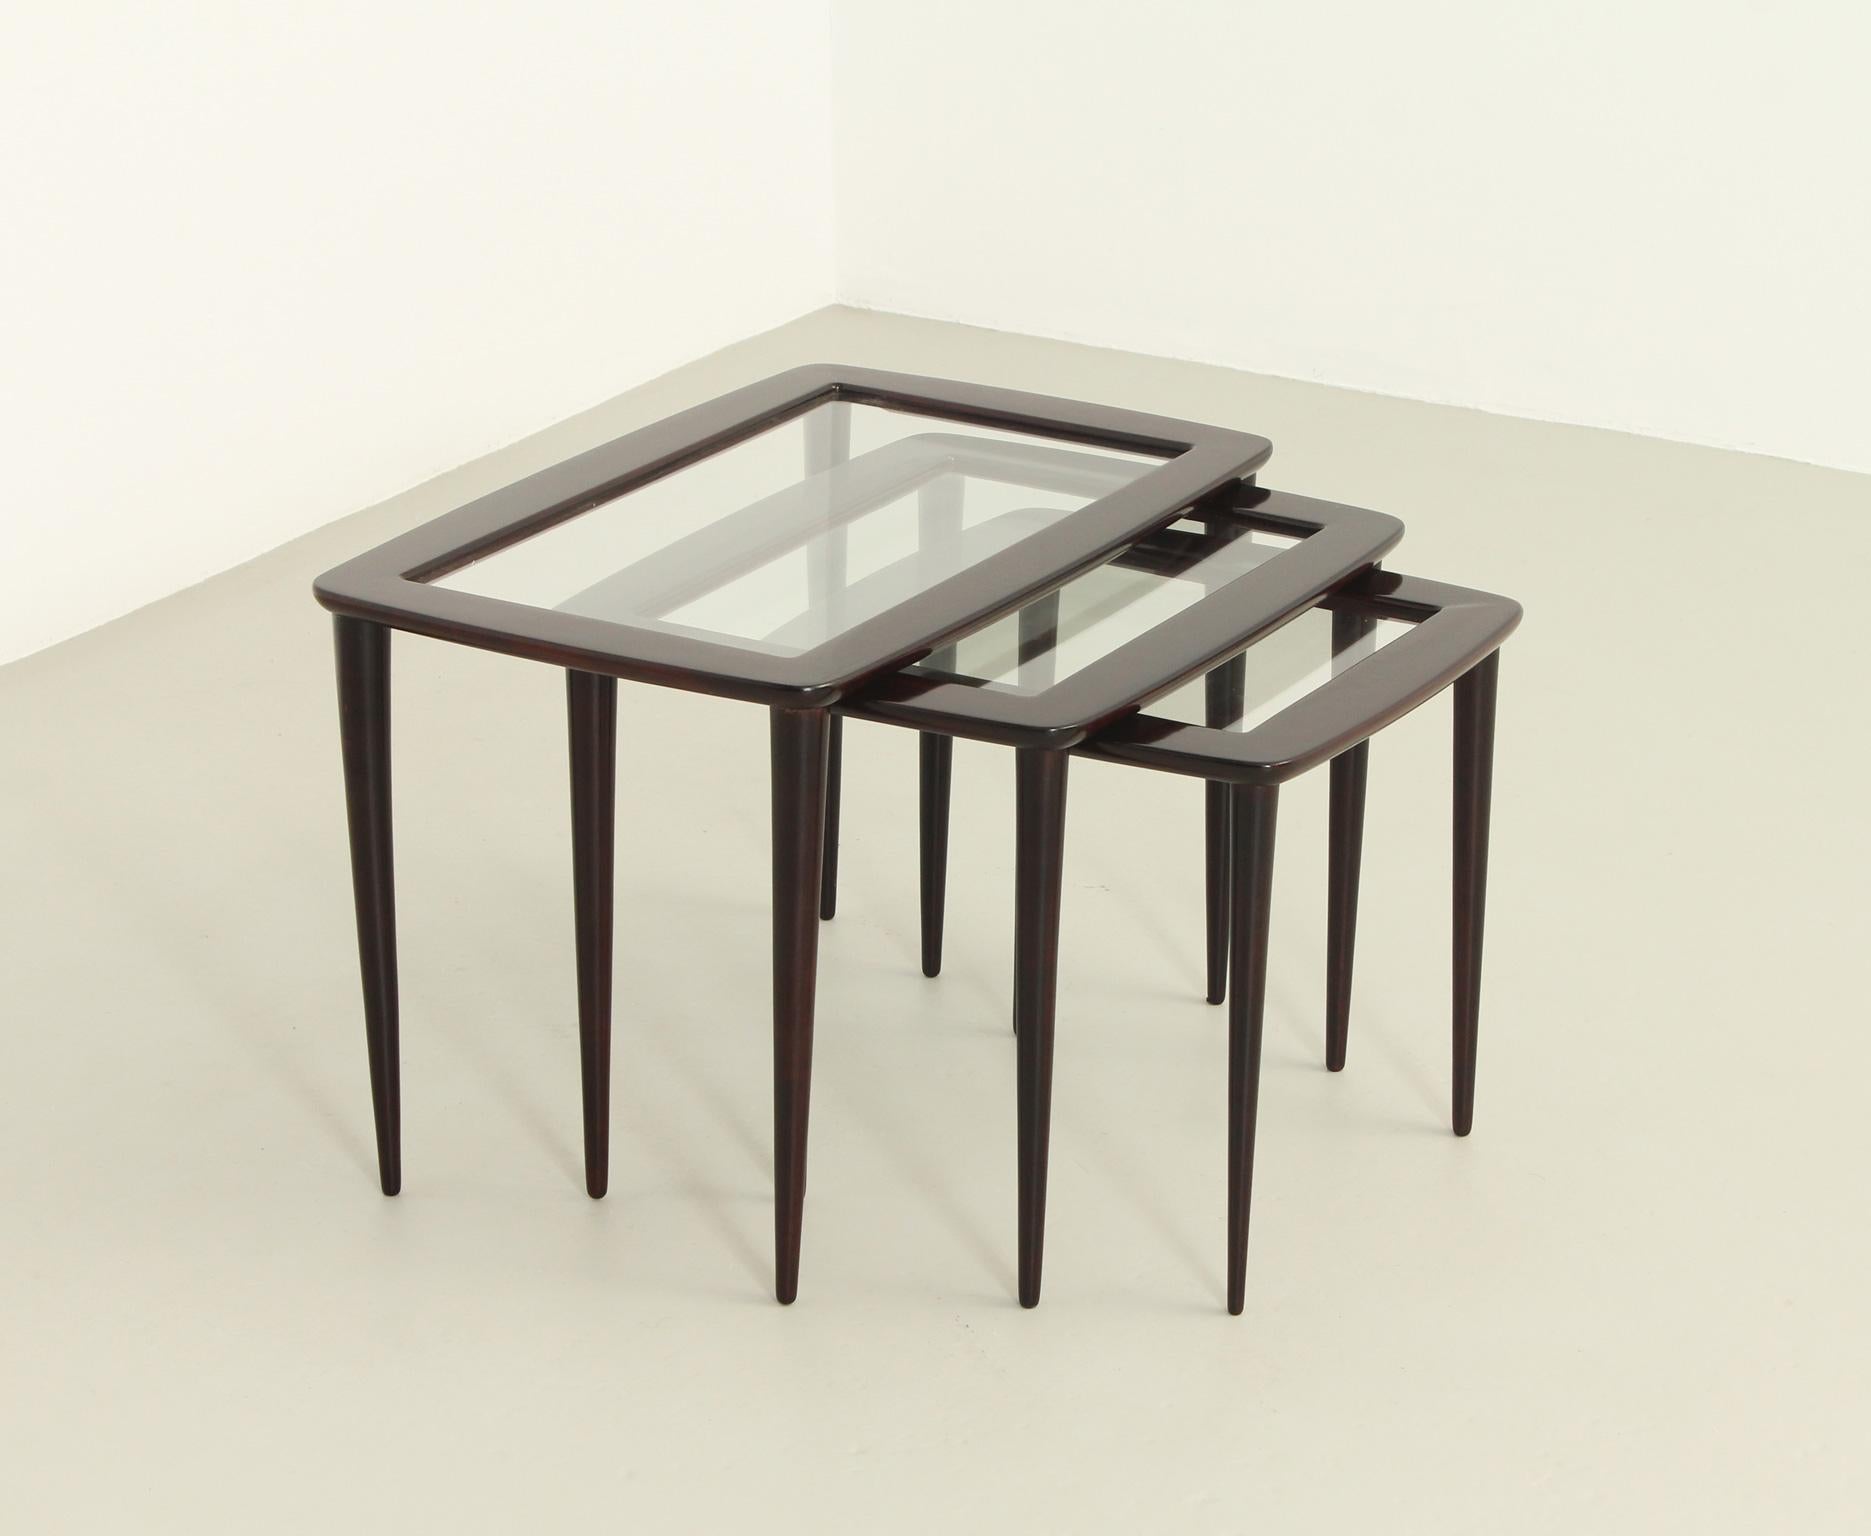 Italian Set of Nesting Tables by Ico Parisi for De Baggis, 1955 For Sale